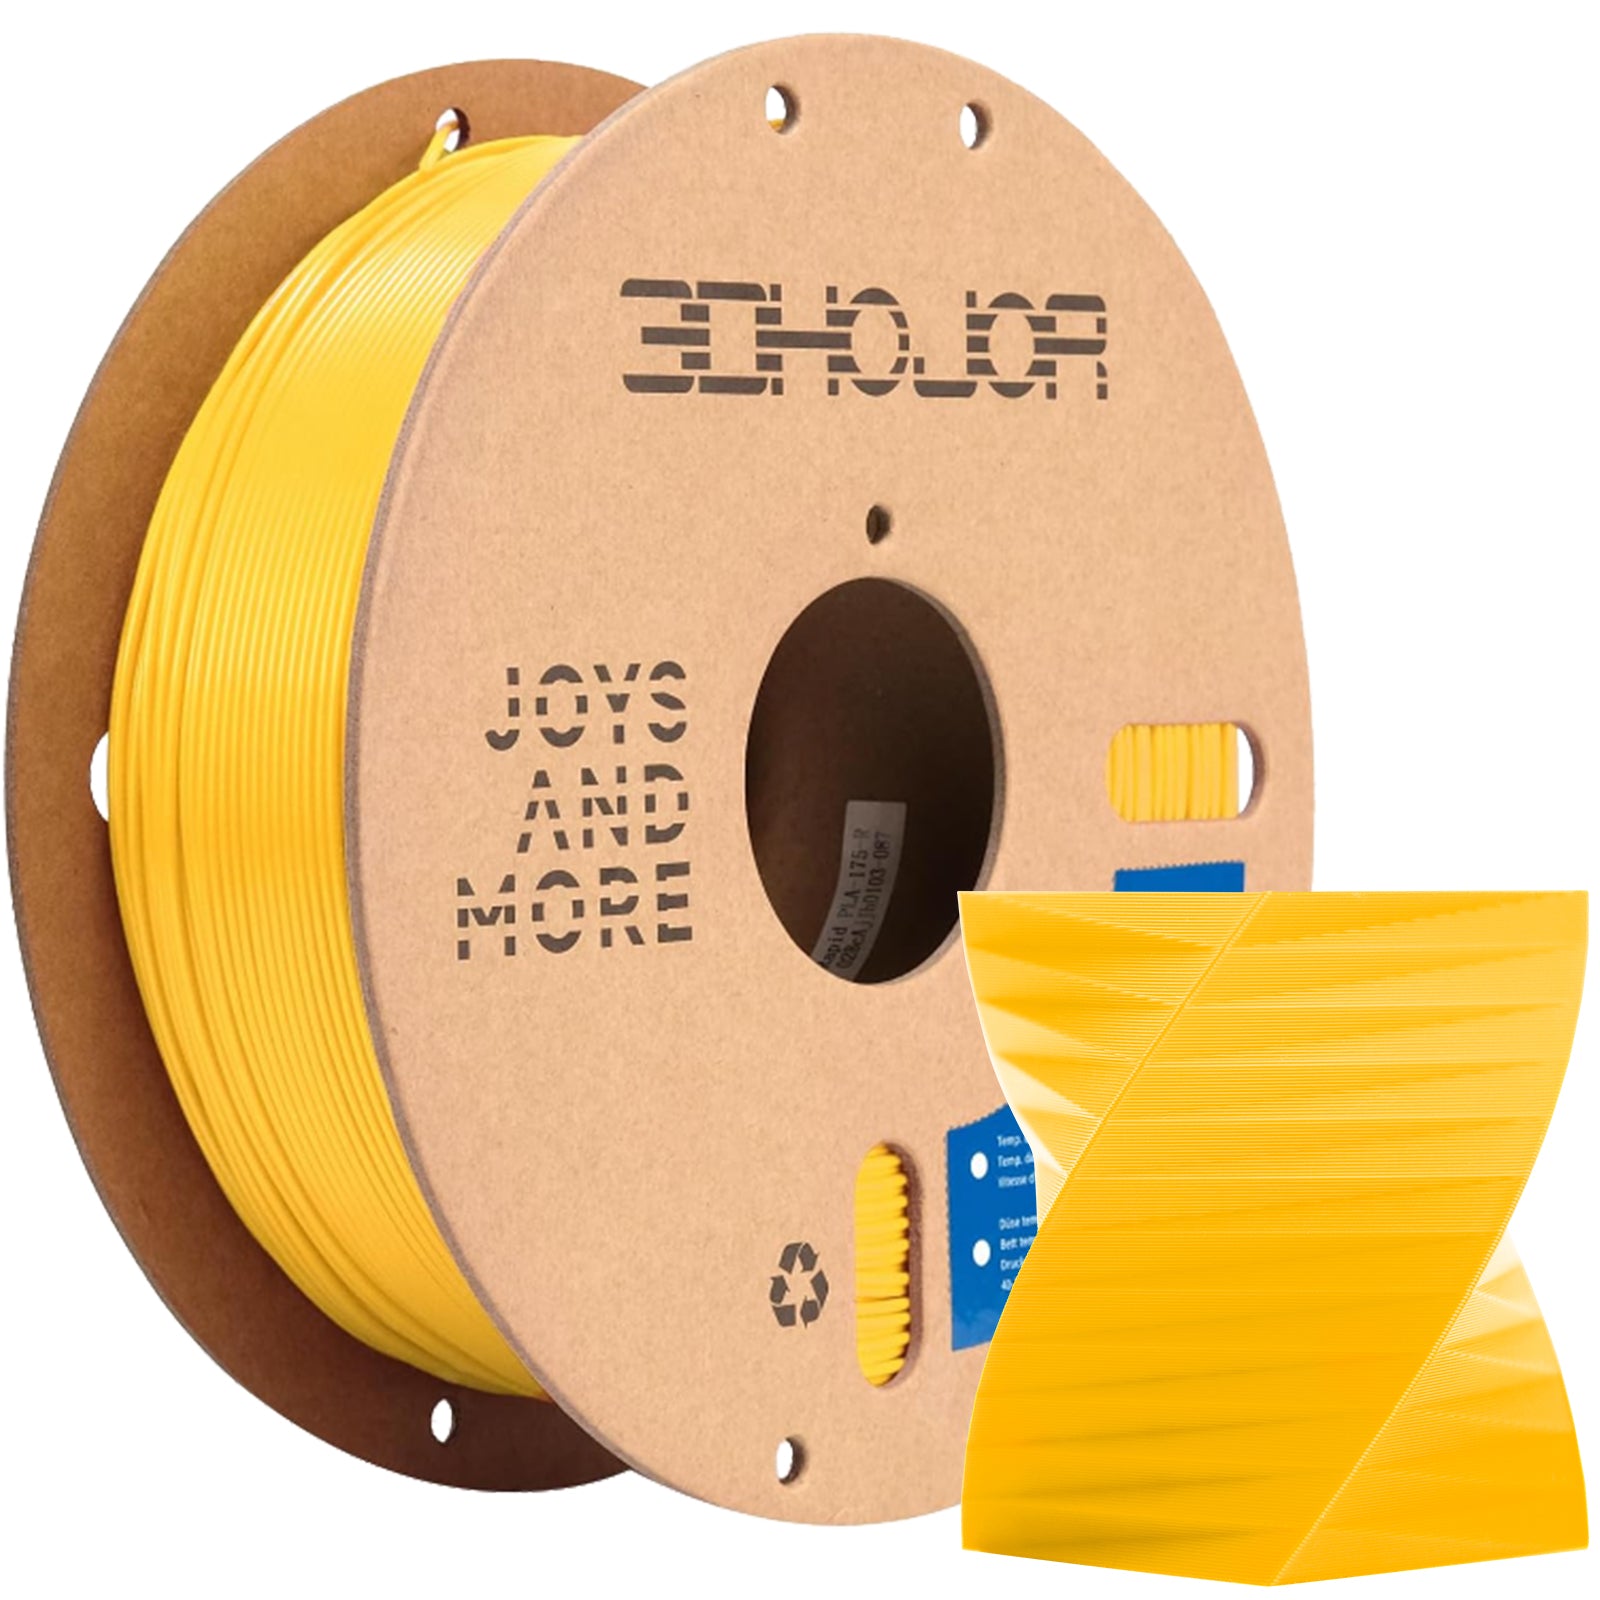 3DHoJor PLA High Speed Printer Filament 1.75mm 1kg Cardboard Spool (2.2lbs) Rapid PLA to 5X Faster Printing Filament PLA Dimensional Accuracy +/- 0.02 mm Fits for Most FDM 3D Printer-Yellow